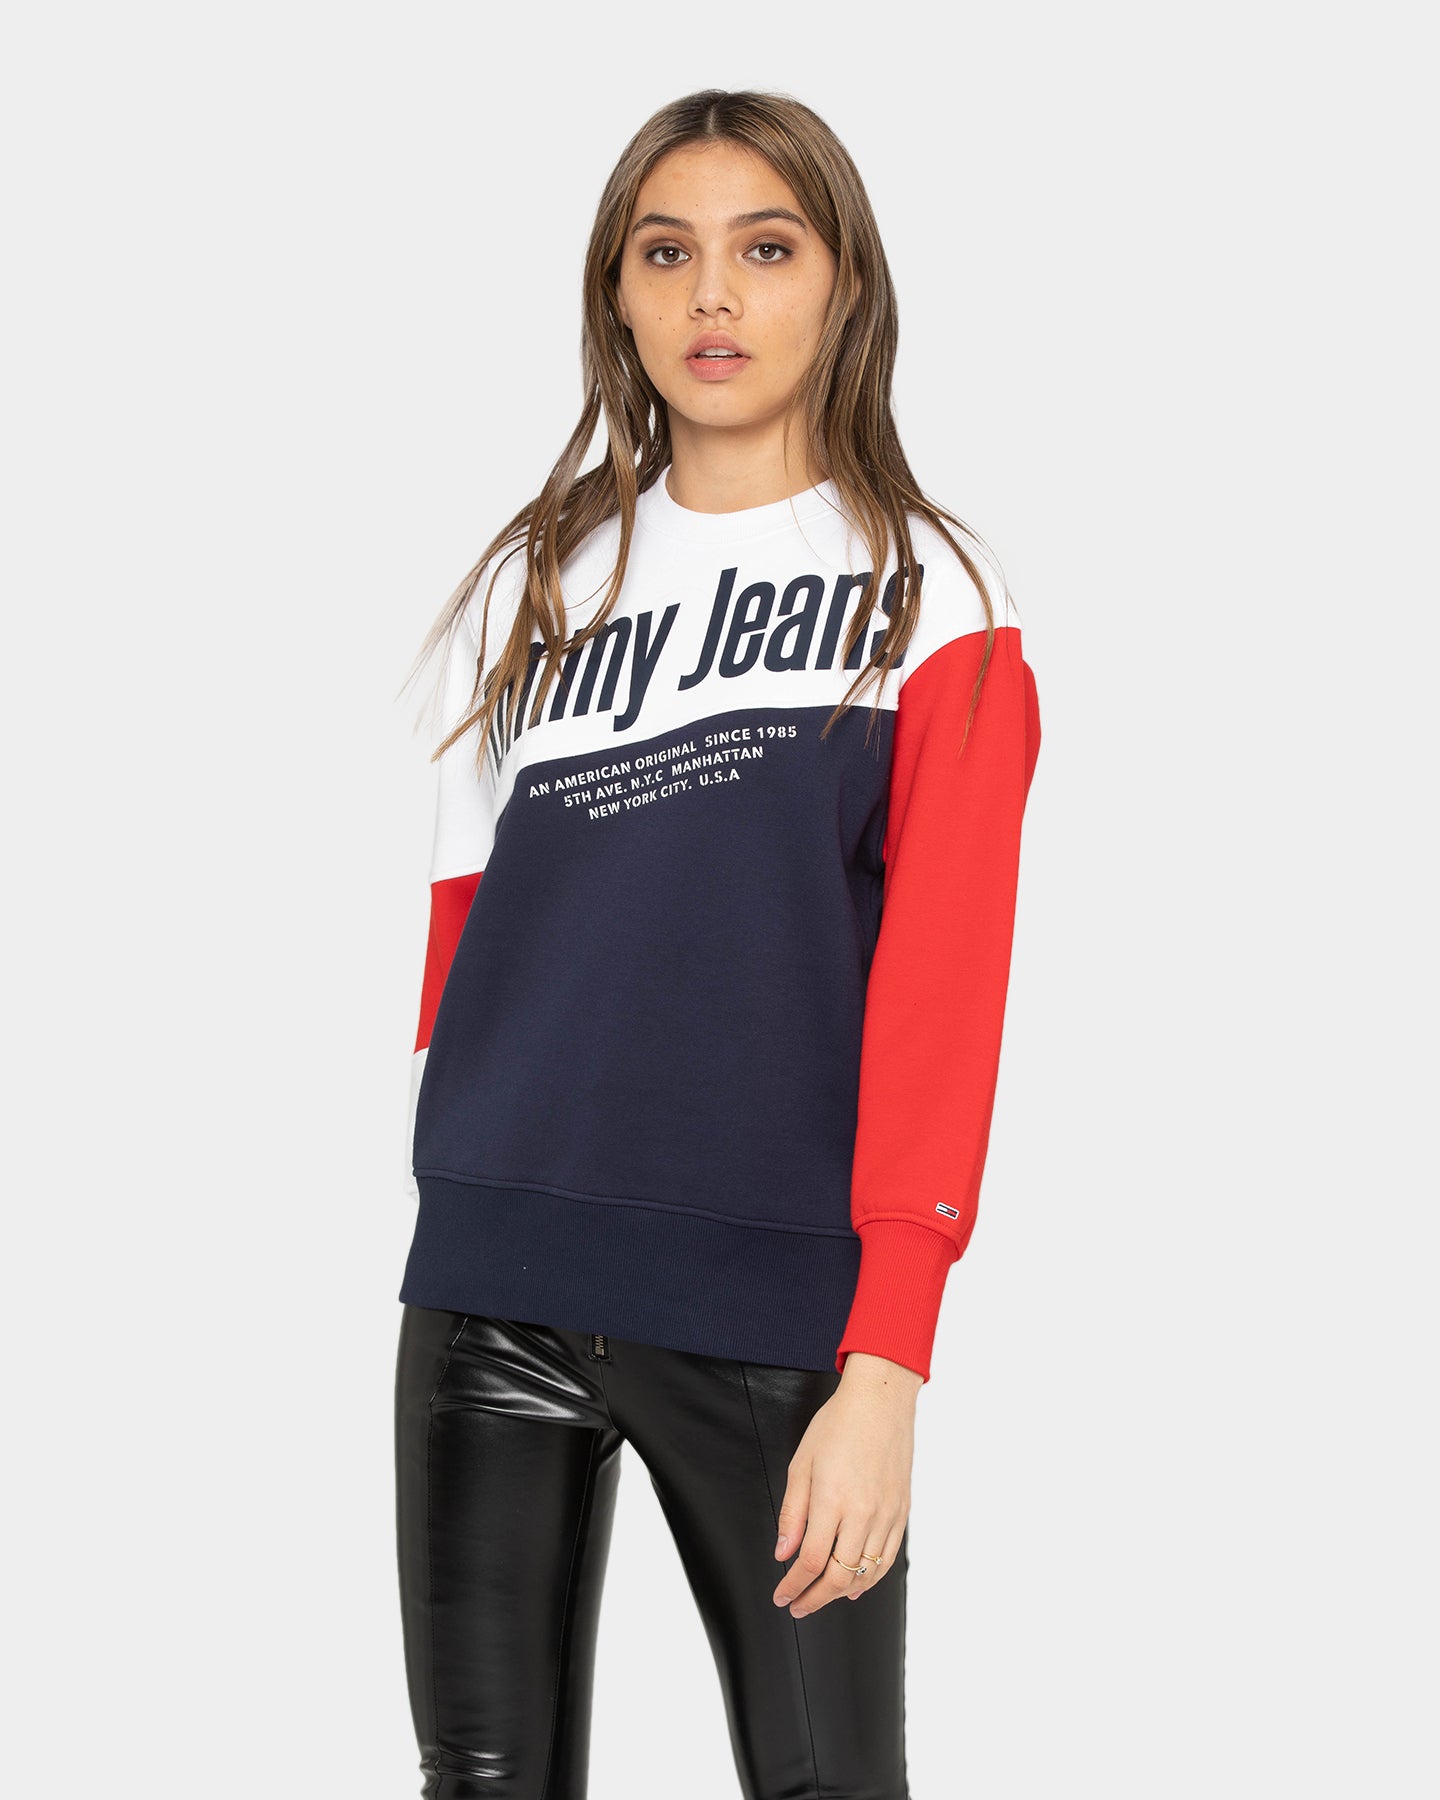 tommy jeans crew